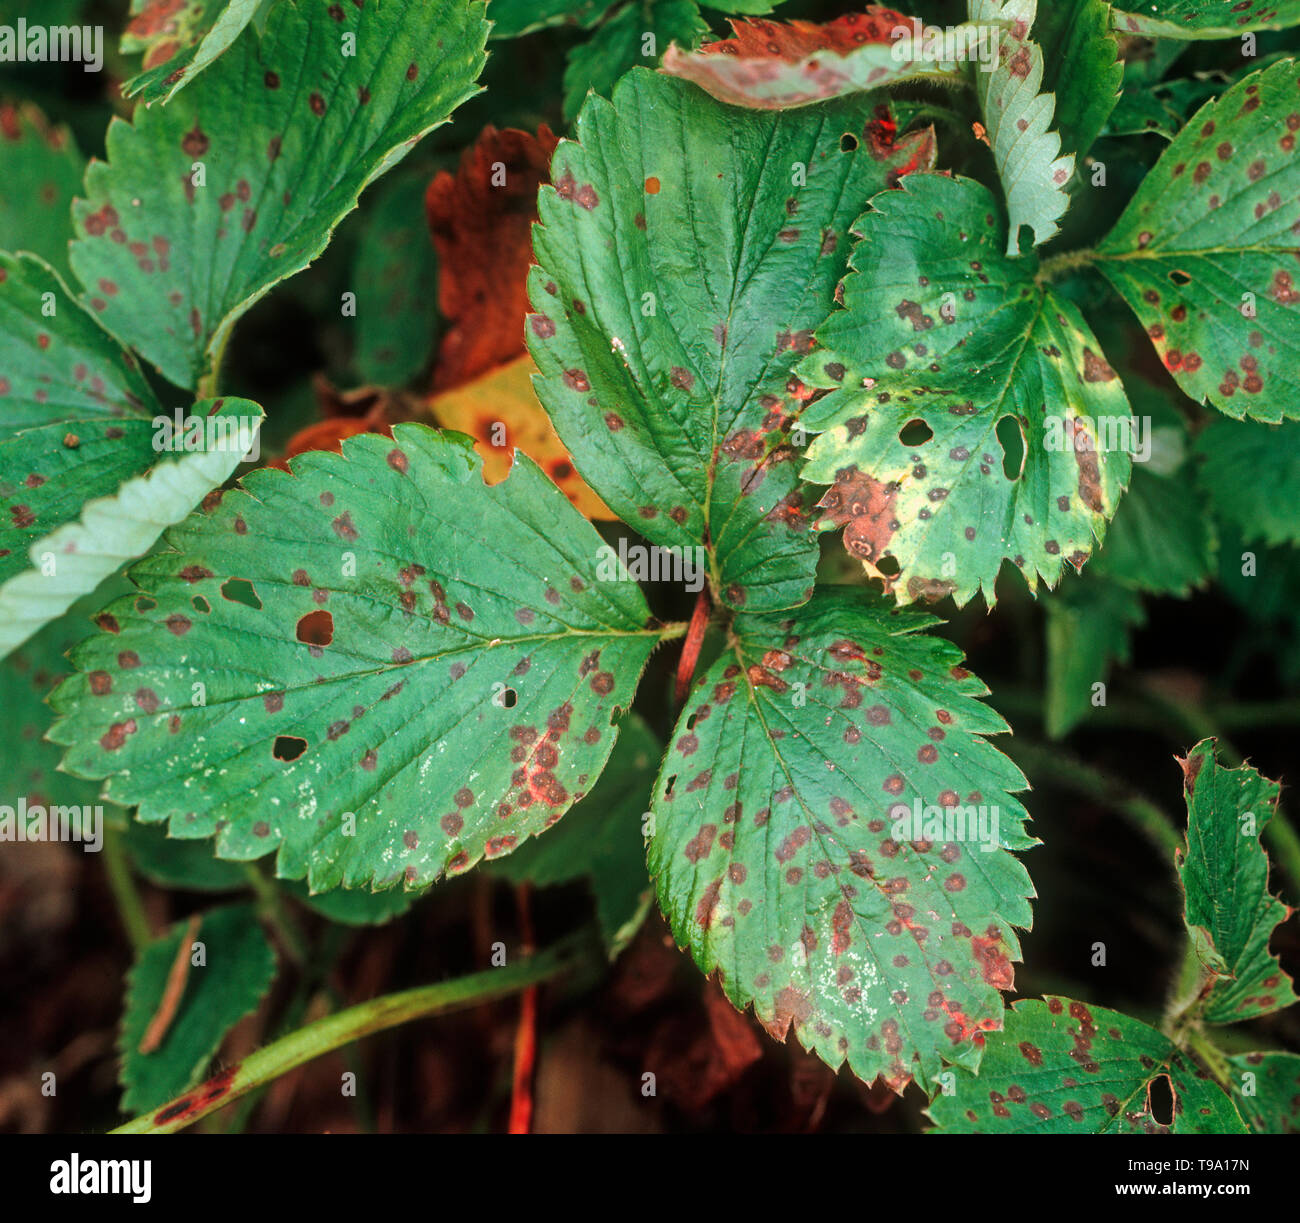 Strawberry leaf spot (Mycosphaerella fragariae) leaf syptoms on strawberry leaves, spots with pale centres Stock Photo